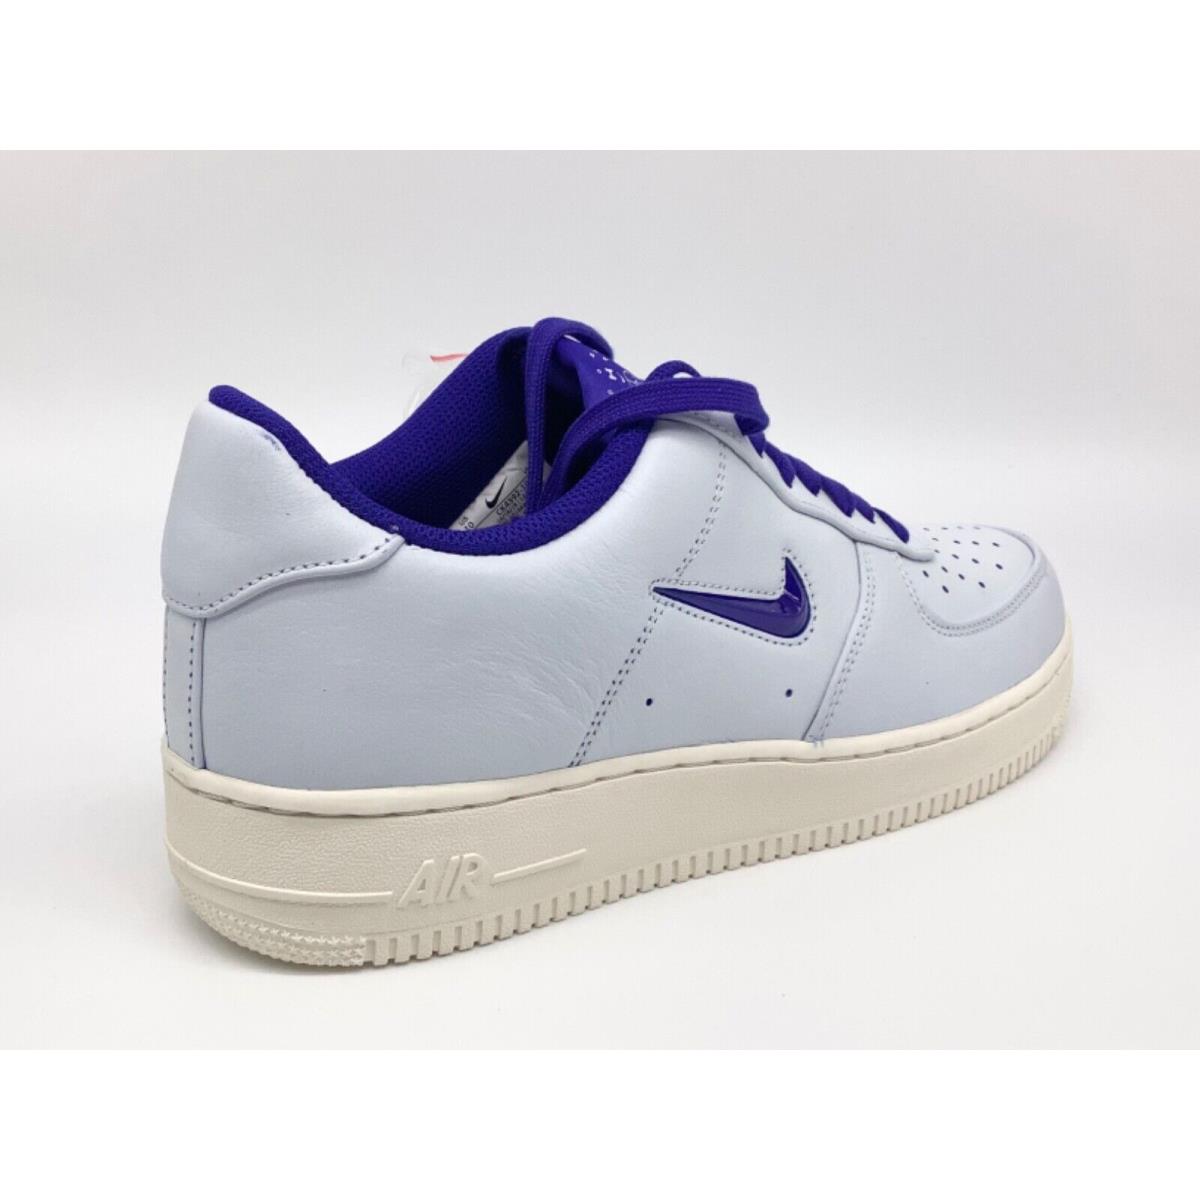 Nike shoes Air Force - Blue 3